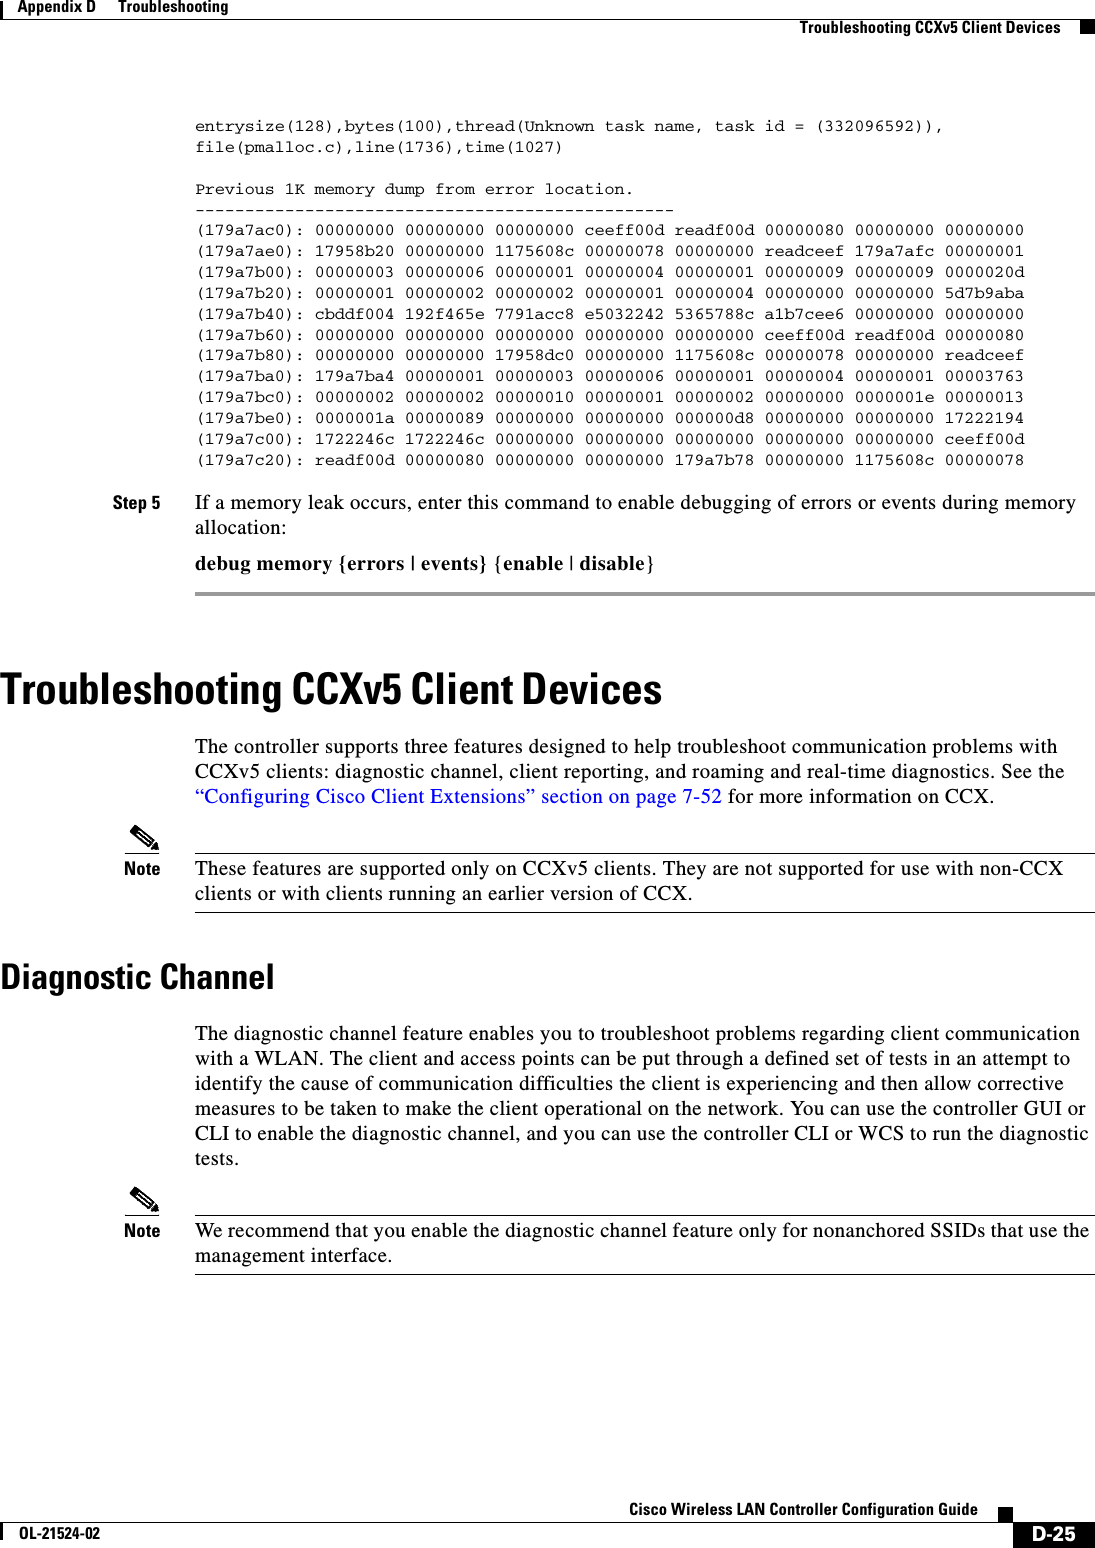  D-25Cisco Wireless LAN Controller Configuration GuideOL-21524-02Appendix D      Troubleshooting  Troubleshooting CCXv5 Client Devicesentrysize(128),bytes(100),thread(Unknown task name, task id = (332096592)),file(pmalloc.c),line(1736),time(1027)Previous 1K memory dump from error location.------------------------------------------------(179a7ac0): 00000000 00000000 00000000 ceeff00d readf00d 00000080 00000000 00000000(179a7ae0): 17958b20 00000000 1175608c 00000078 00000000 readceef 179a7afc 00000001(179a7b00): 00000003 00000006 00000001 00000004 00000001 00000009 00000009 0000020d(179a7b20): 00000001 00000002 00000002 00000001 00000004 00000000 00000000 5d7b9aba(179a7b40): cbddf004 192f465e 7791acc8 e5032242 5365788c a1b7cee6 00000000 00000000(179a7b60): 00000000 00000000 00000000 00000000 00000000 ceeff00d readf00d 00000080(179a7b80): 00000000 00000000 17958dc0 00000000 1175608c 00000078 00000000 readceef(179a7ba0): 179a7ba4 00000001 00000003 00000006 00000001 00000004 00000001 00003763(179a7bc0): 00000002 00000002 00000010 00000001 00000002 00000000 0000001e 00000013(179a7be0): 0000001a 00000089 00000000 00000000 000000d8 00000000 00000000 17222194(179a7c00): 1722246c 1722246c 00000000 00000000 00000000 00000000 00000000 ceeff00d(179a7c20): readf00d 00000080 00000000 00000000 179a7b78 00000000 1175608c 00000078 Step 5 If a memory leak occurs, enter this command to enable debugging of errors or events during memory allocation:debug memory {errors | events} {enable | disable}Troubleshooting CCXv5 Client DevicesThe controller supports three features designed to help troubleshoot communication problems with CCXv5 clients: diagnostic channel, client reporting, and roaming and real-time diagnostics. See the “Configuring Cisco Client Extensions” section on page 7-52 for more information on CCX.Note These features are supported only on CCXv5 clients. They are not supported for use with non-CCX clients or with clients running an earlier version of CCX.Diagnostic ChannelThe diagnostic channel feature enables you to troubleshoot problems regarding client communication with a WLAN. The client and access points can be put through a defined set of tests in an attempt to identify the cause of communication difficulties the client is experiencing and then allow corrective measures to be taken to make the client operational on the network. You can use the controller GUI or CLI to enable the diagnostic channel, and you can use the controller CLI or WCS to run the diagnostic tests.Note We recommend that you enable the diagnostic channel feature only for nonanchored SSIDs that use the management interface.